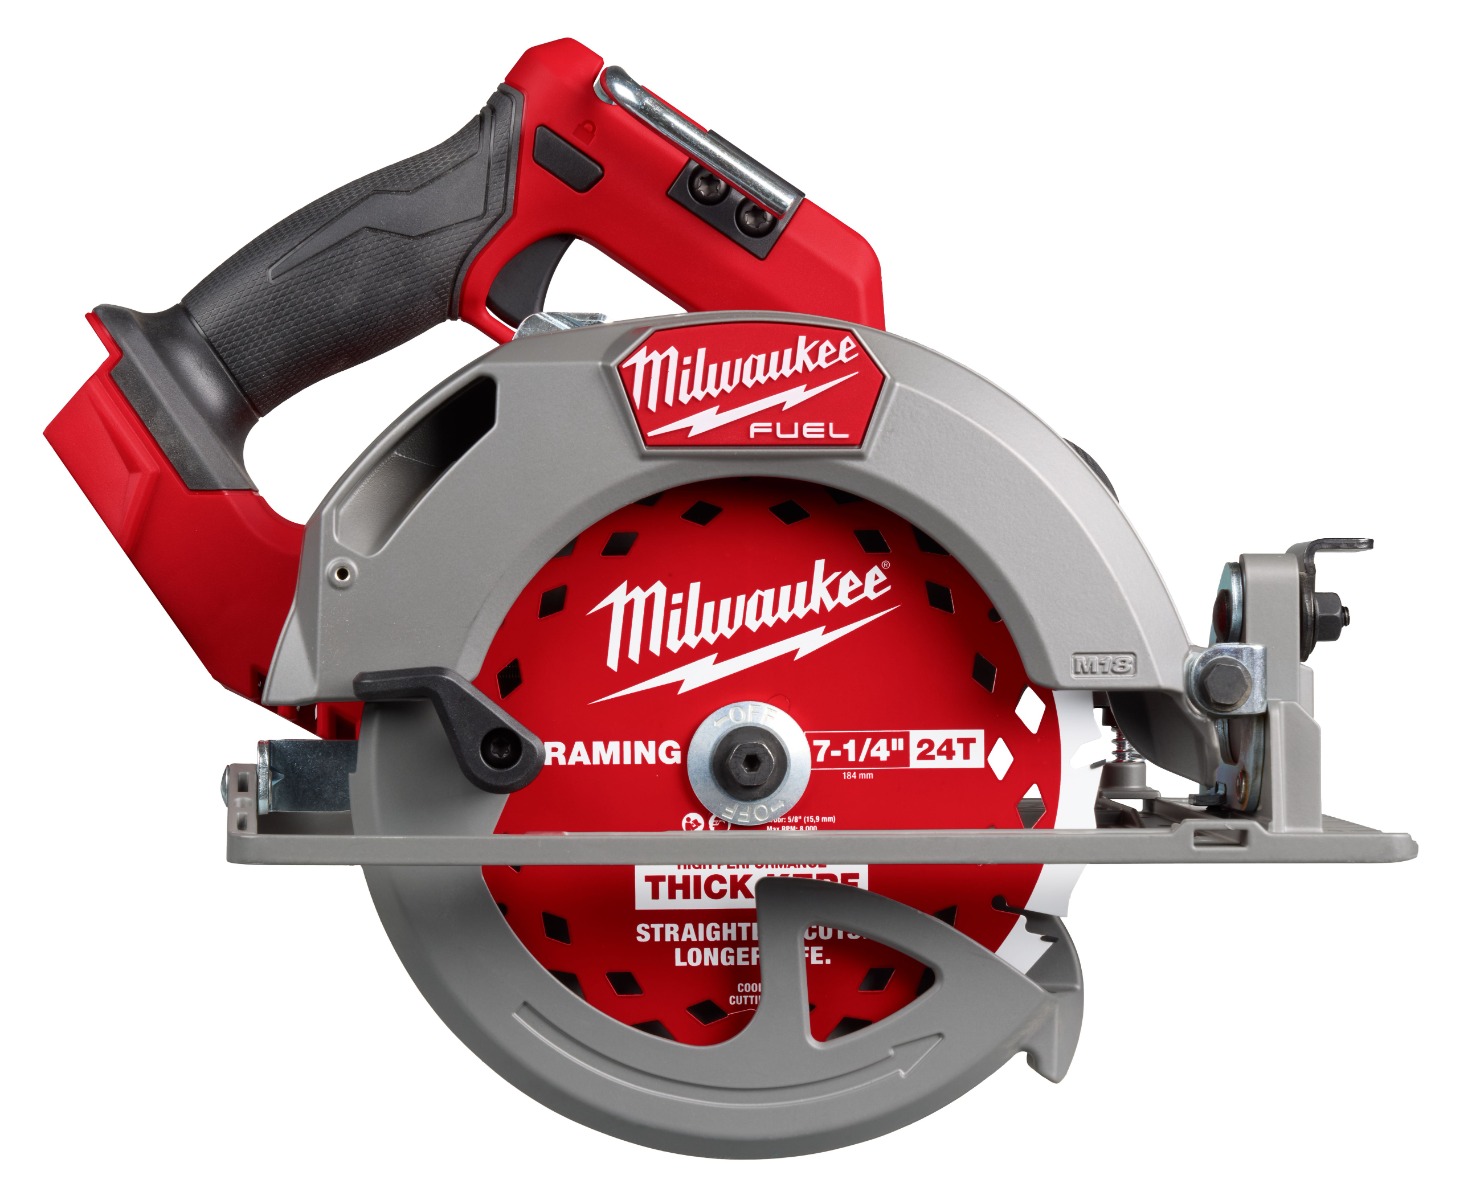 *Pre-Order* M18 FUEL™ 7-1/4” Circular Saw (Tool Only) - 2834-20